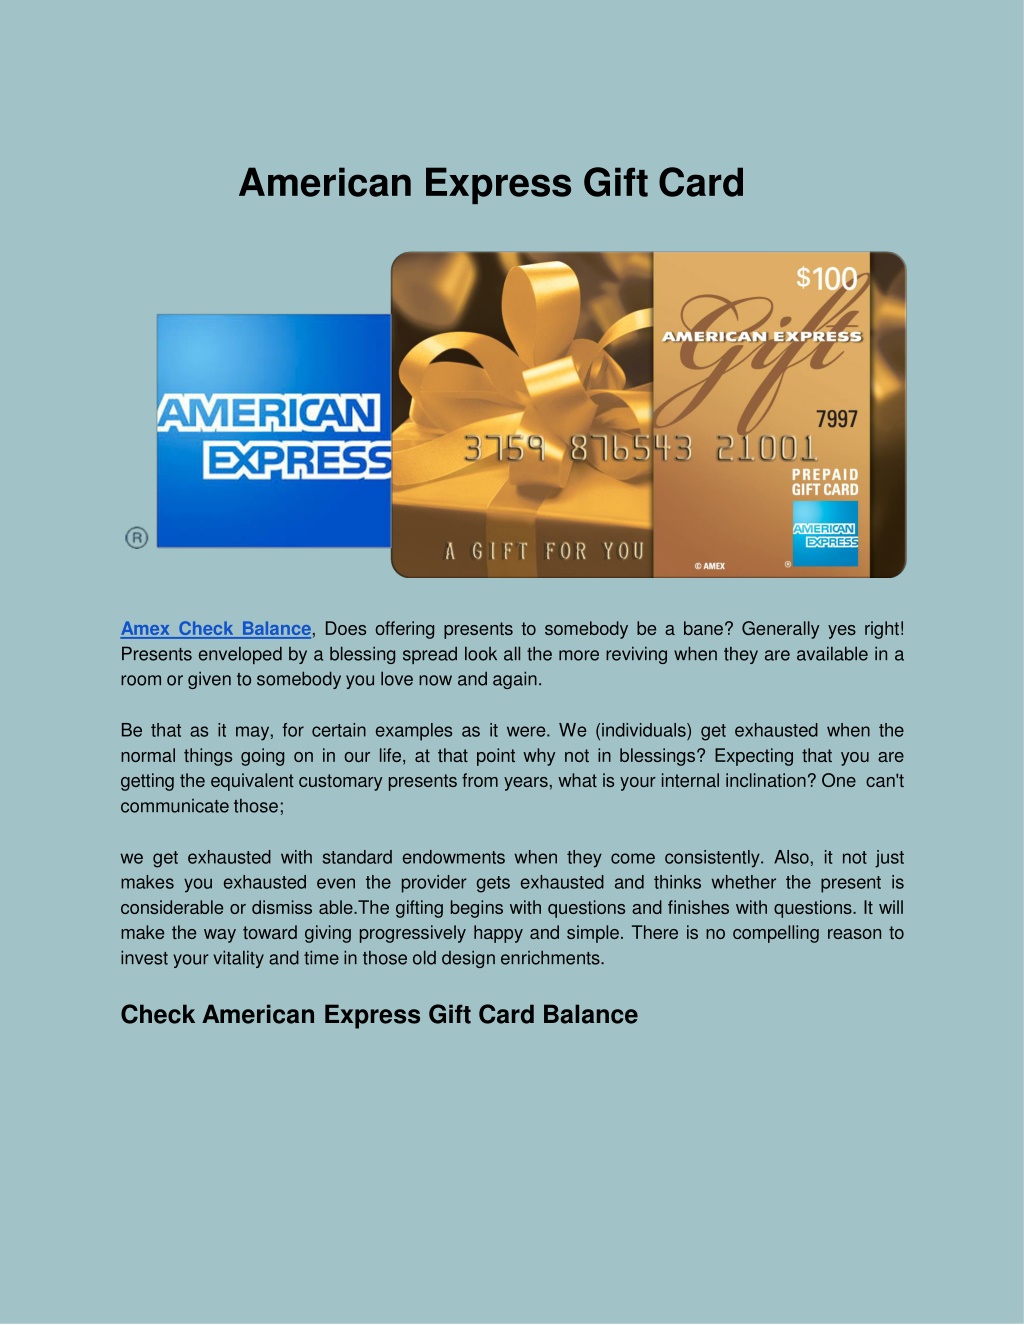 How to Quickly Inspect Check Mastercard Gift Card Balance